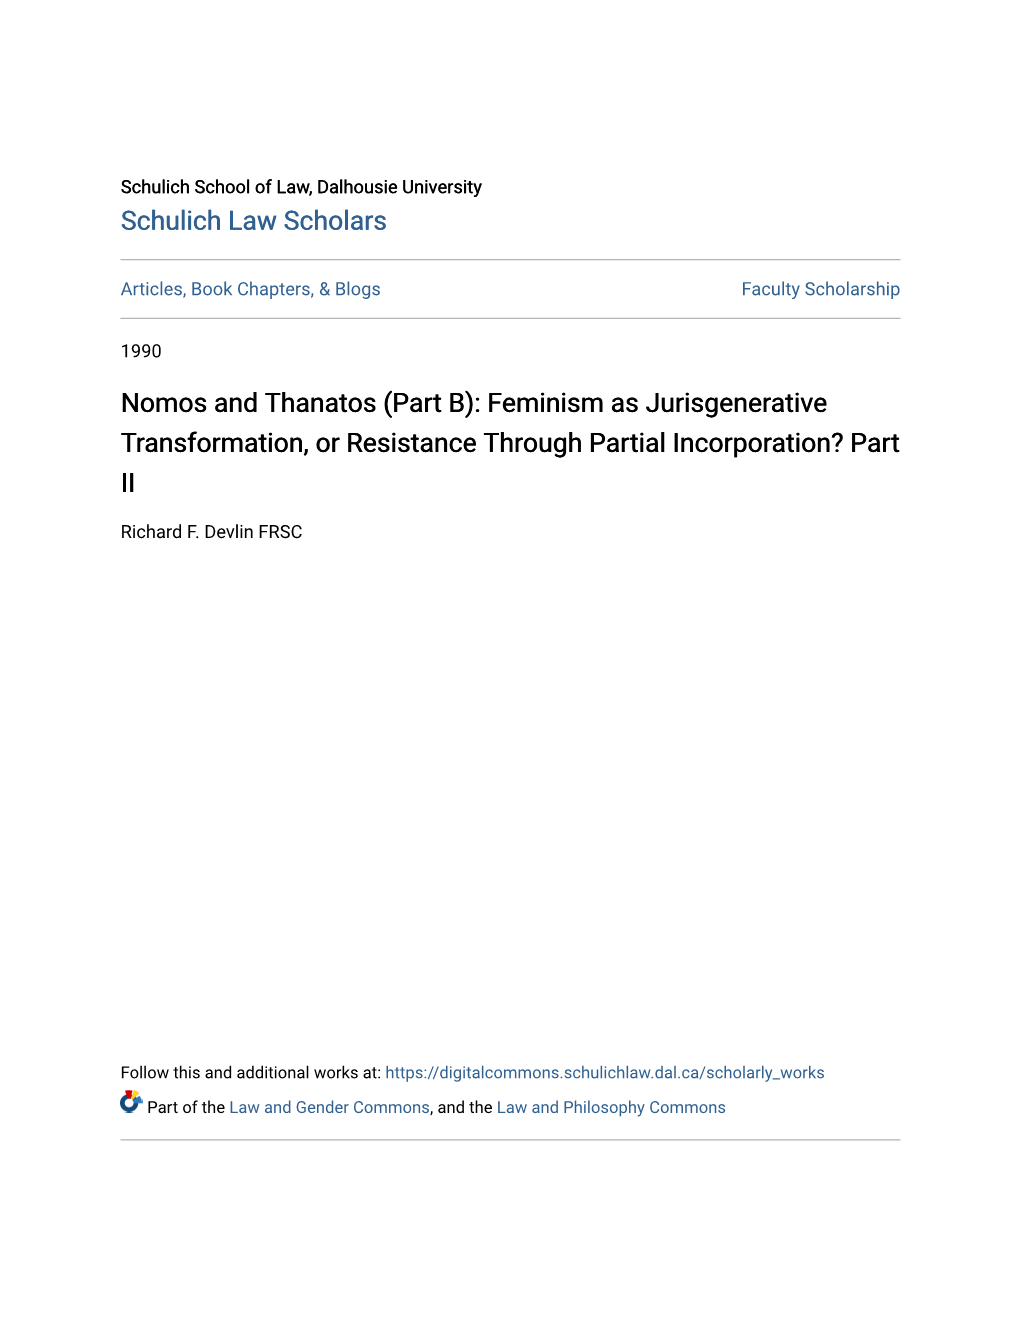 Feminism As Jurisgenerative Transformation, Or Resistance Through Partial Incorporation? Part II